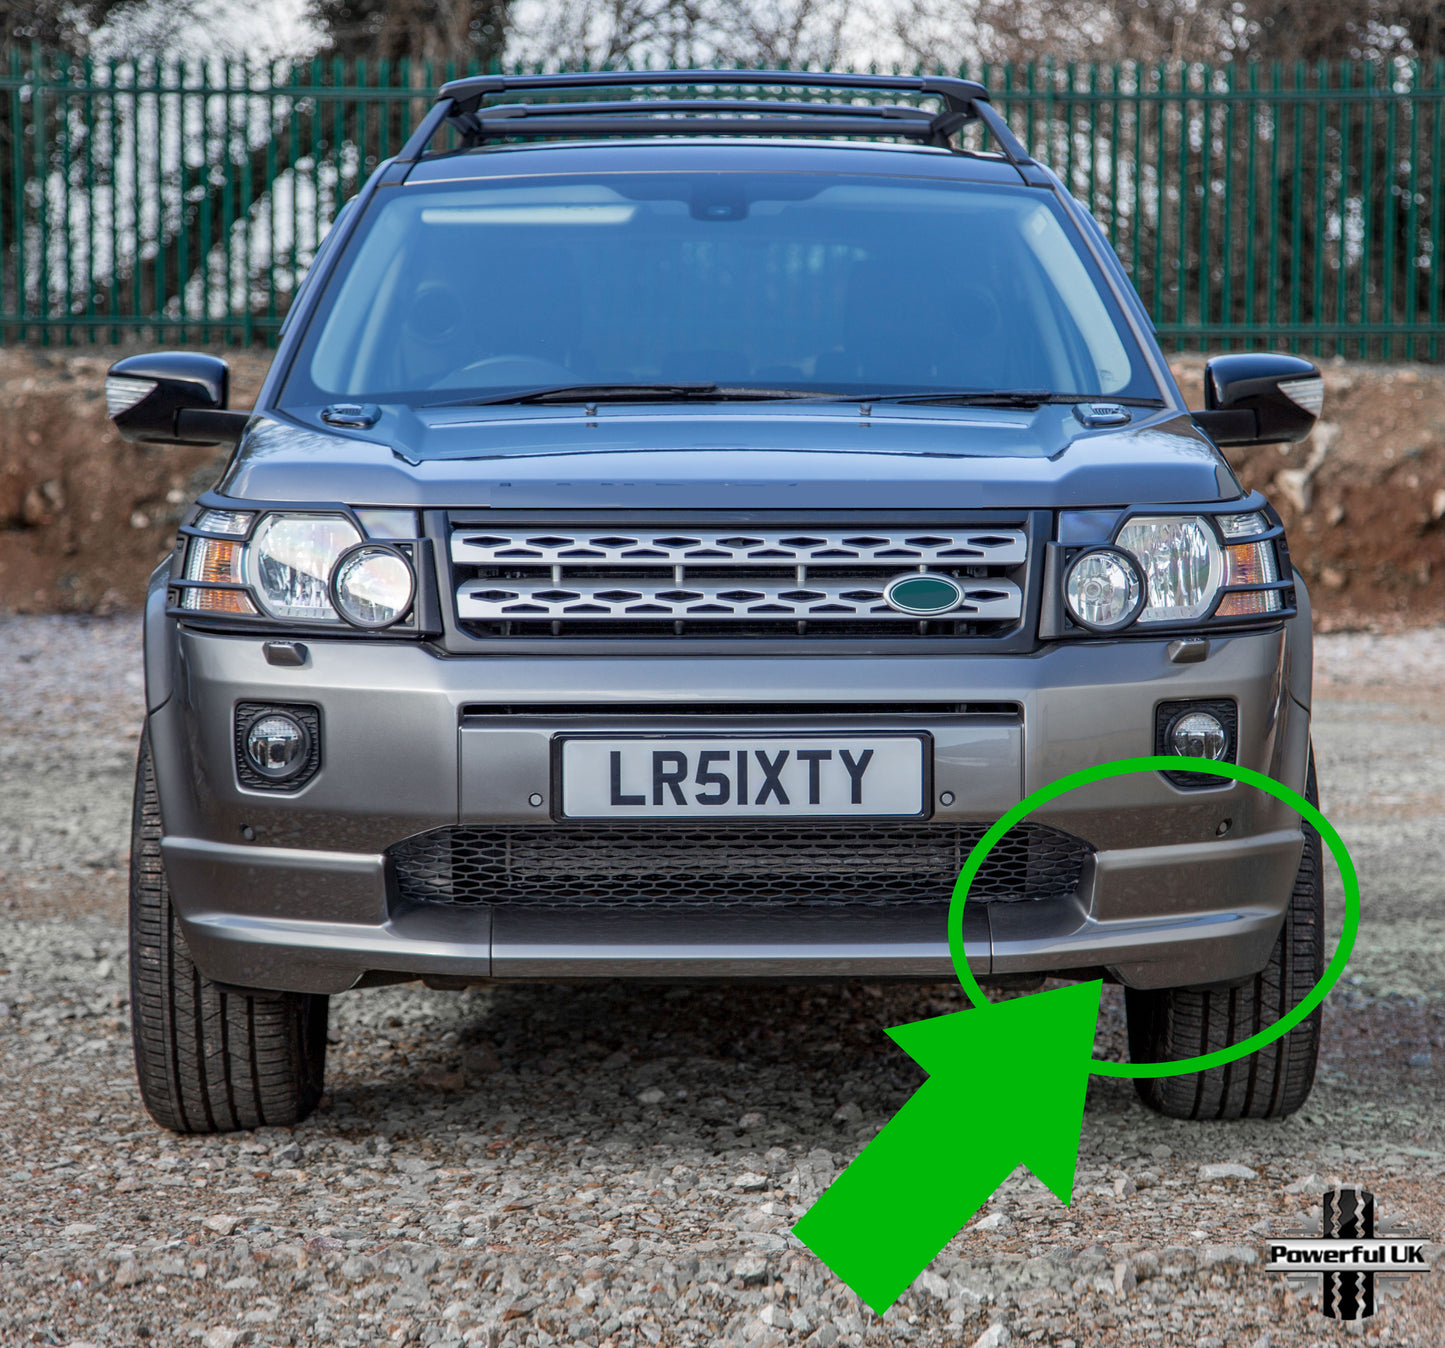 Front Bumper Body Kit - LH - Unpainted - For Land Rover Freelander 2 Dynamic